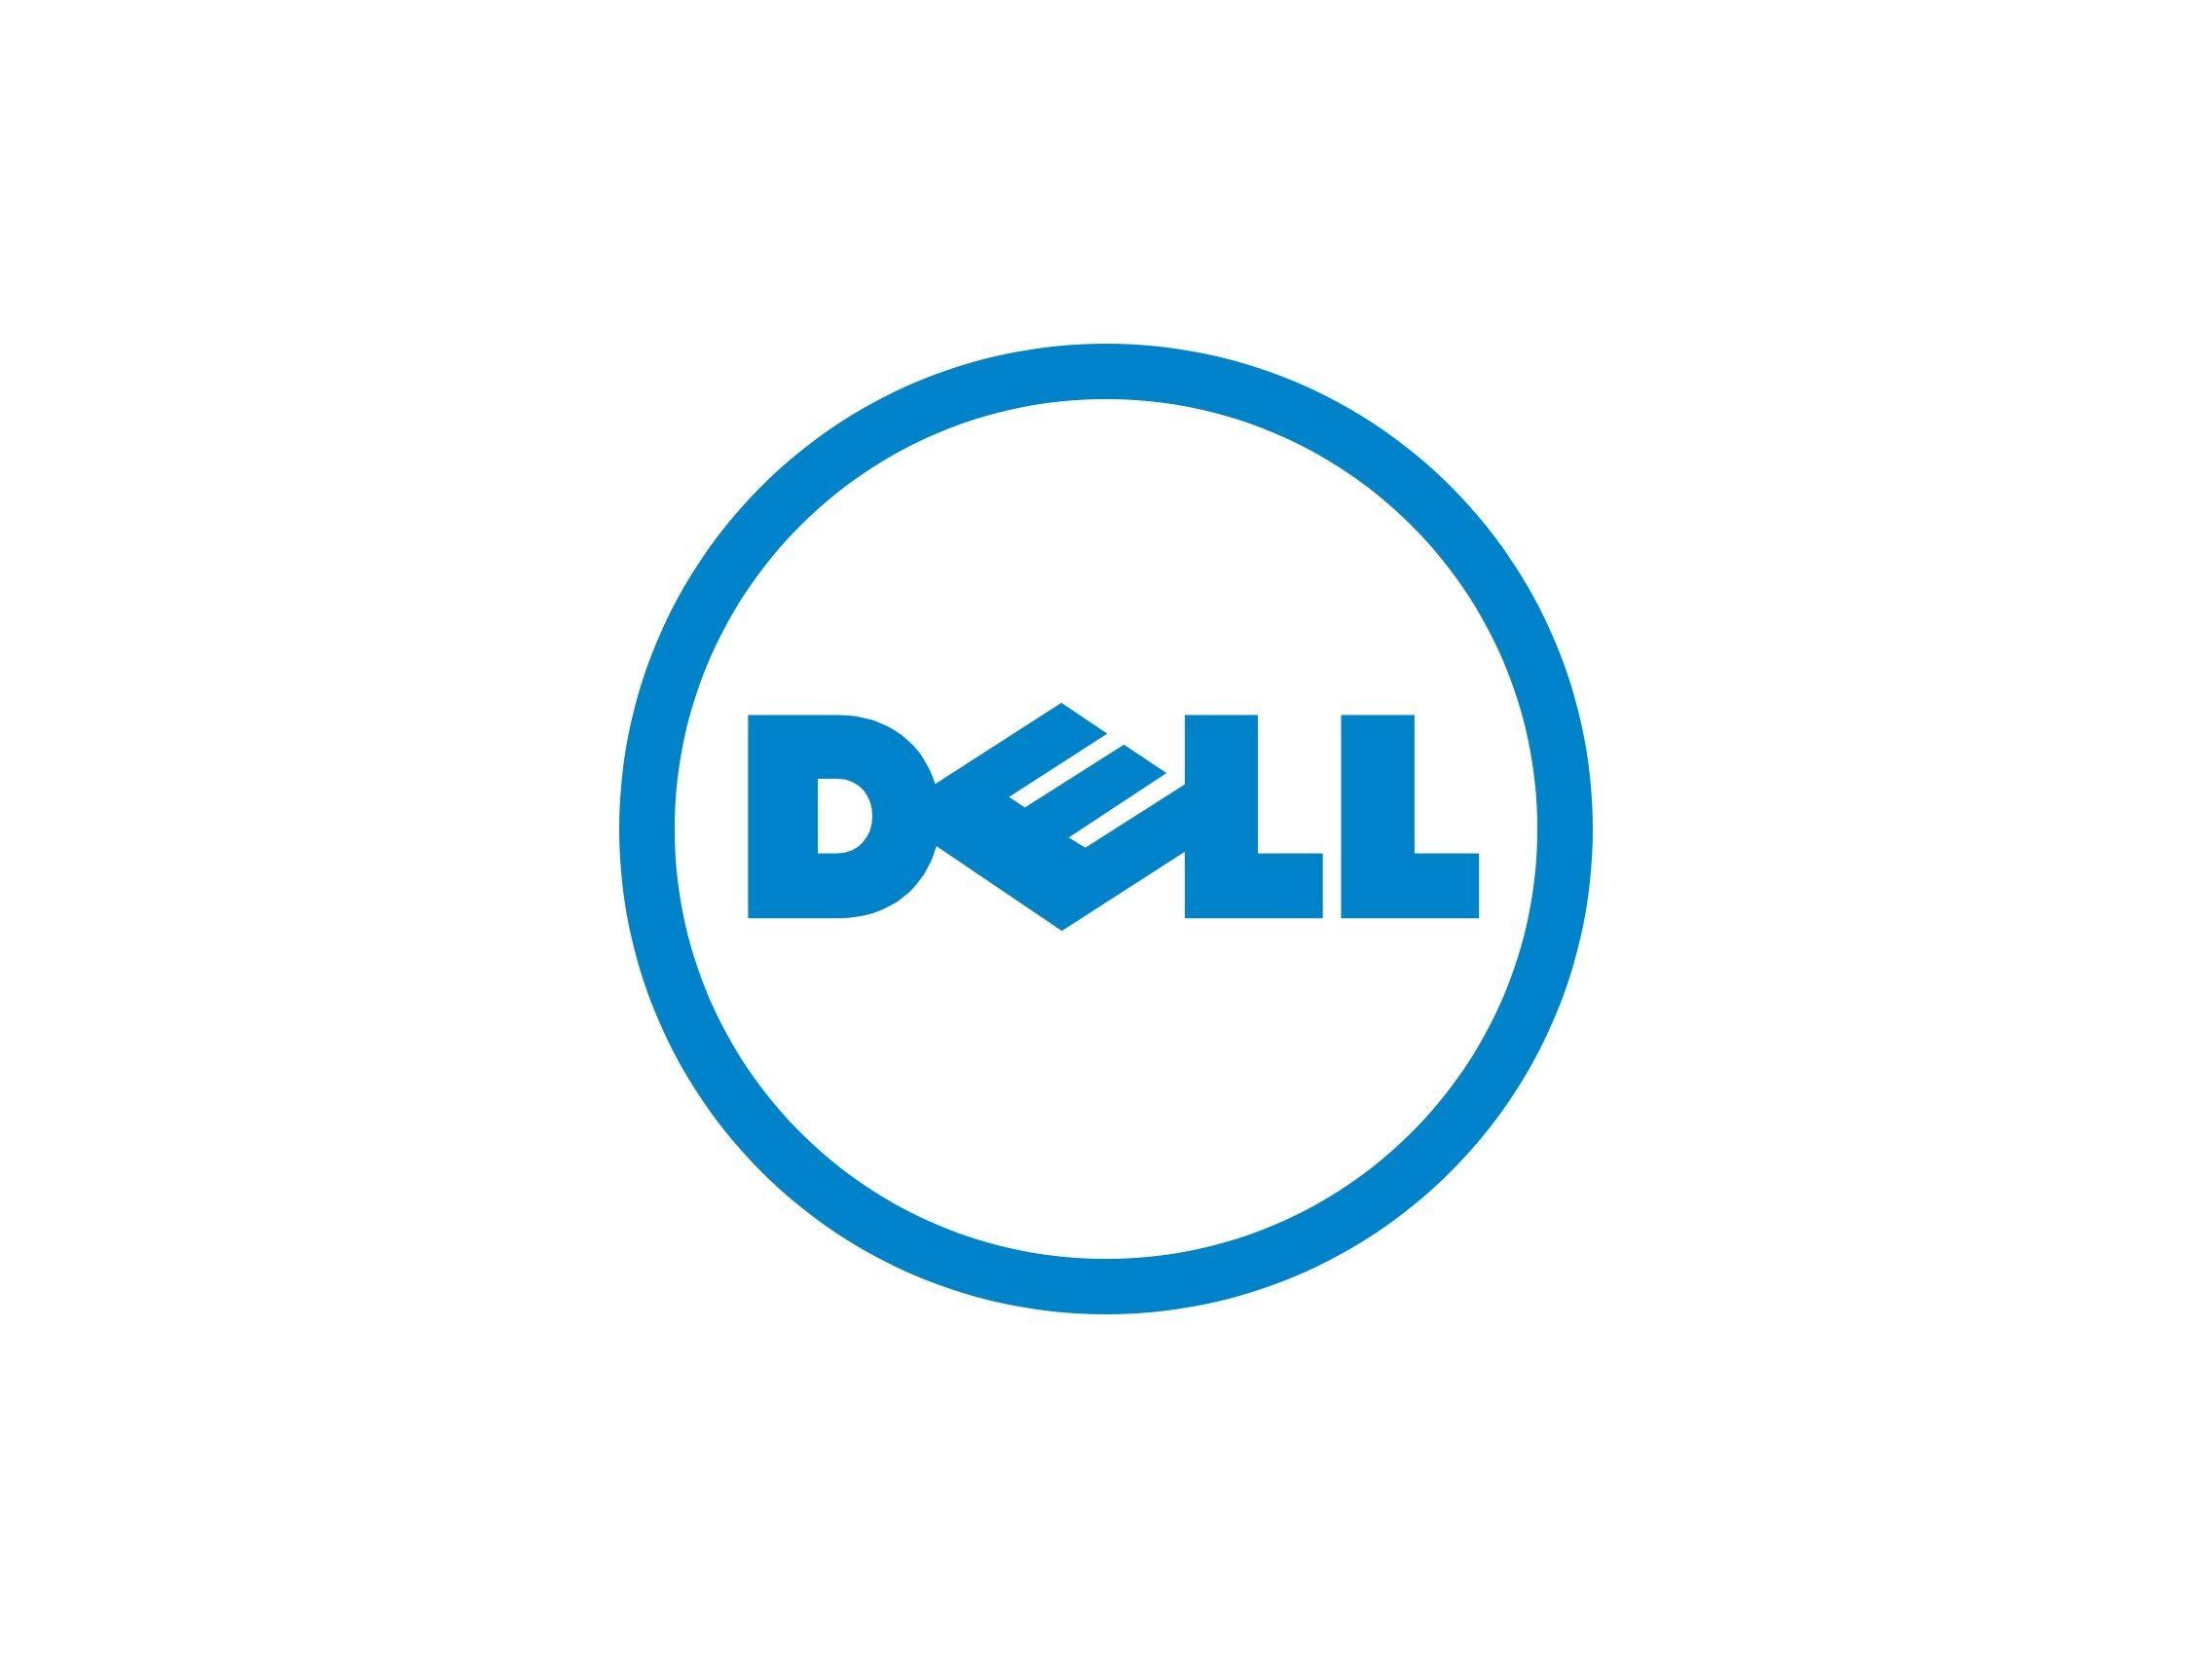 Multinational Computer Technology Company Logo - Dell Inc. is an American privately owned multinational computer